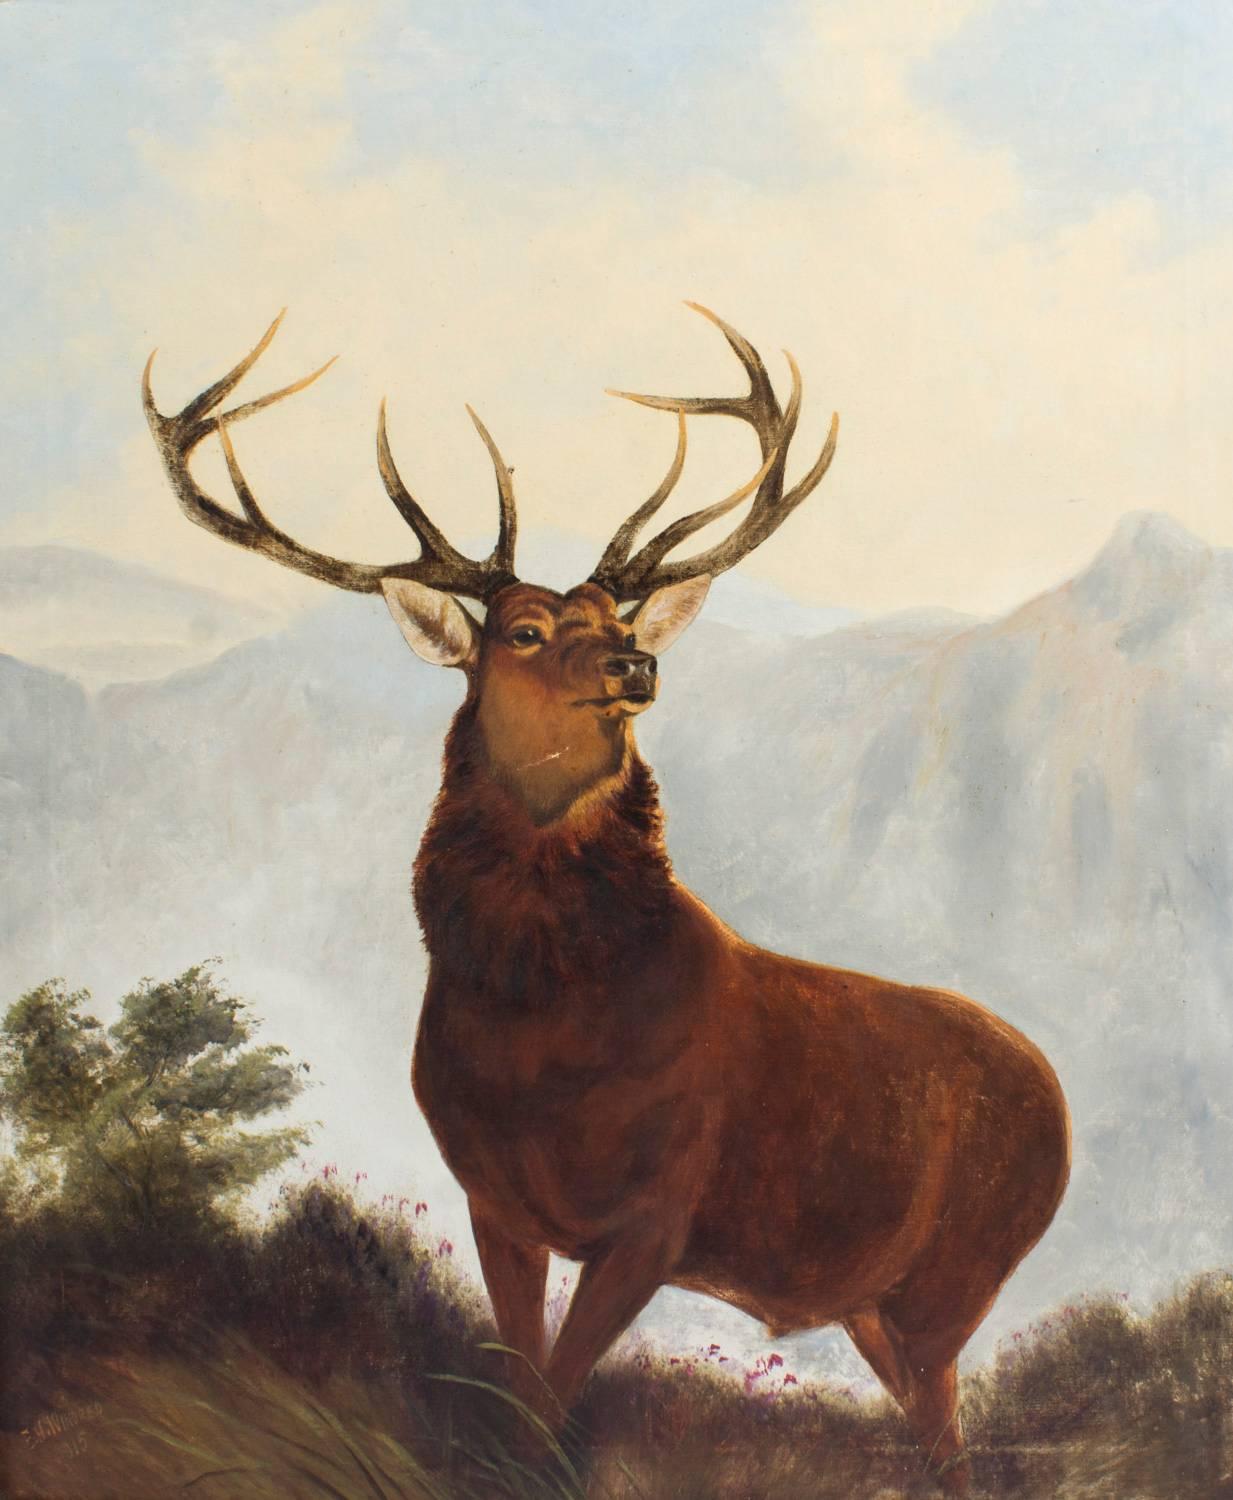 This is a beautiful large antique oil on canvas painting of a stag by Edward Henry Windred (1875-1953), signed and dated 1915, lower left.

The painting features a large red deer at the top of a steep ridge in the Highlands of Scotland.

The artist